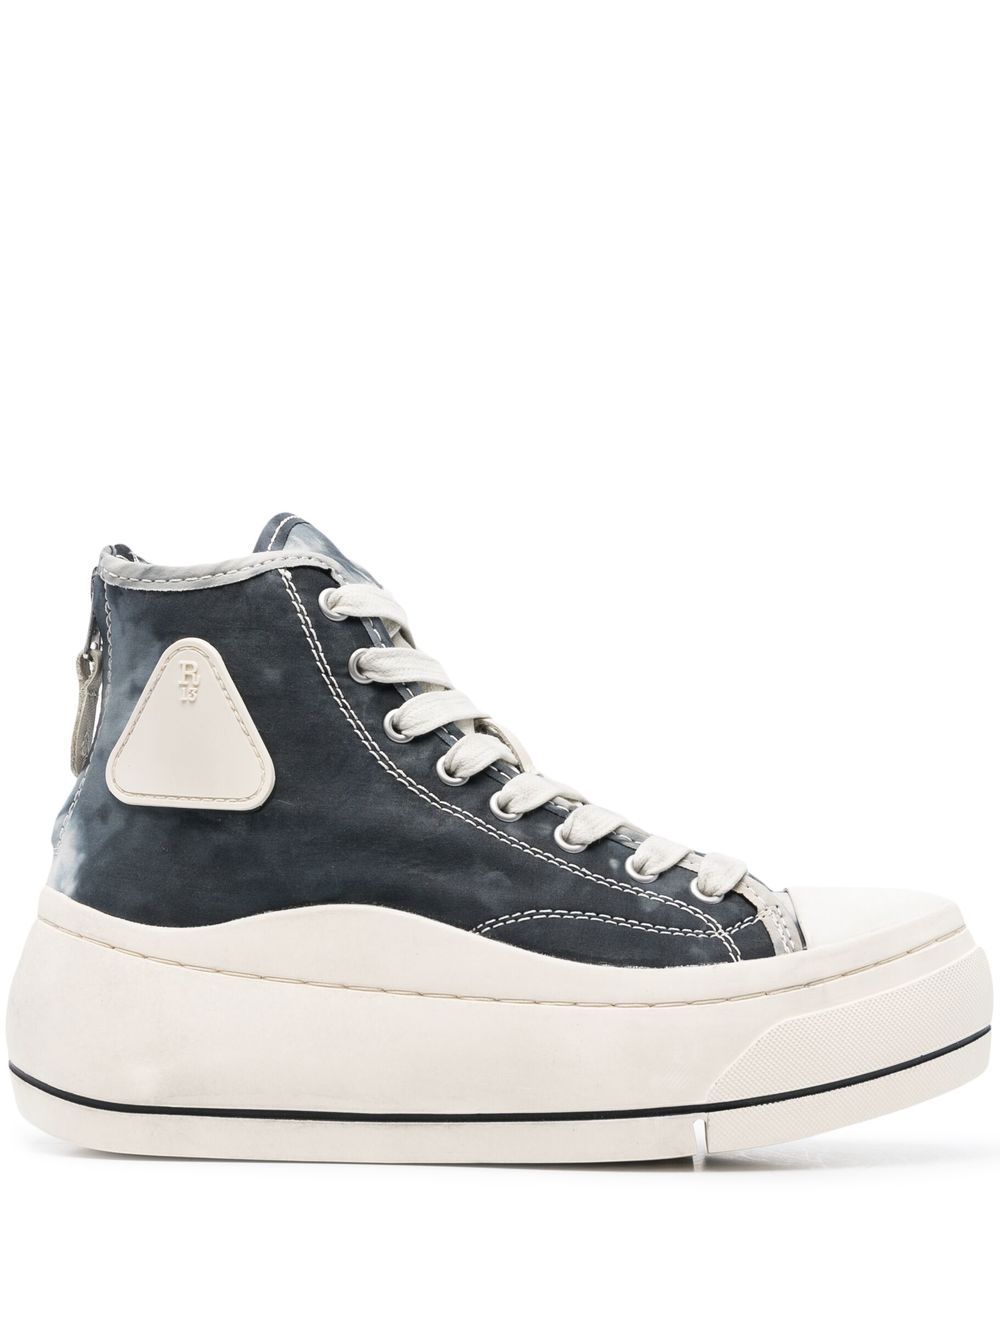 R13 HIGH-TOP CHUNKY SNEAKERS